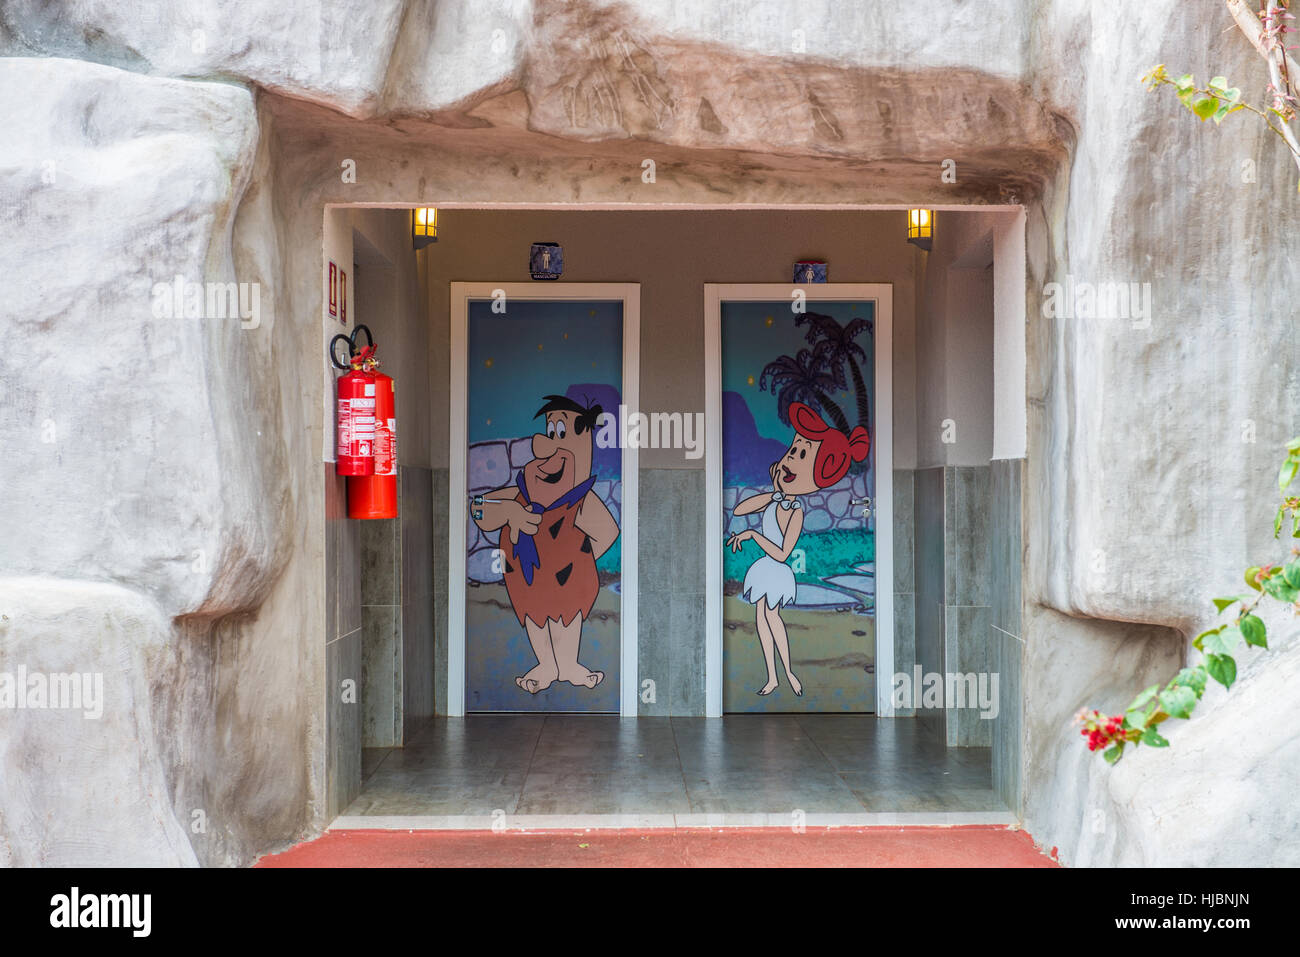 Foz do Iguazu, Brazil - july 10, 2016: Bathroon painting of Fred and Wilma Flintstone character from the Flintstones animated American television sitc Stock Photo